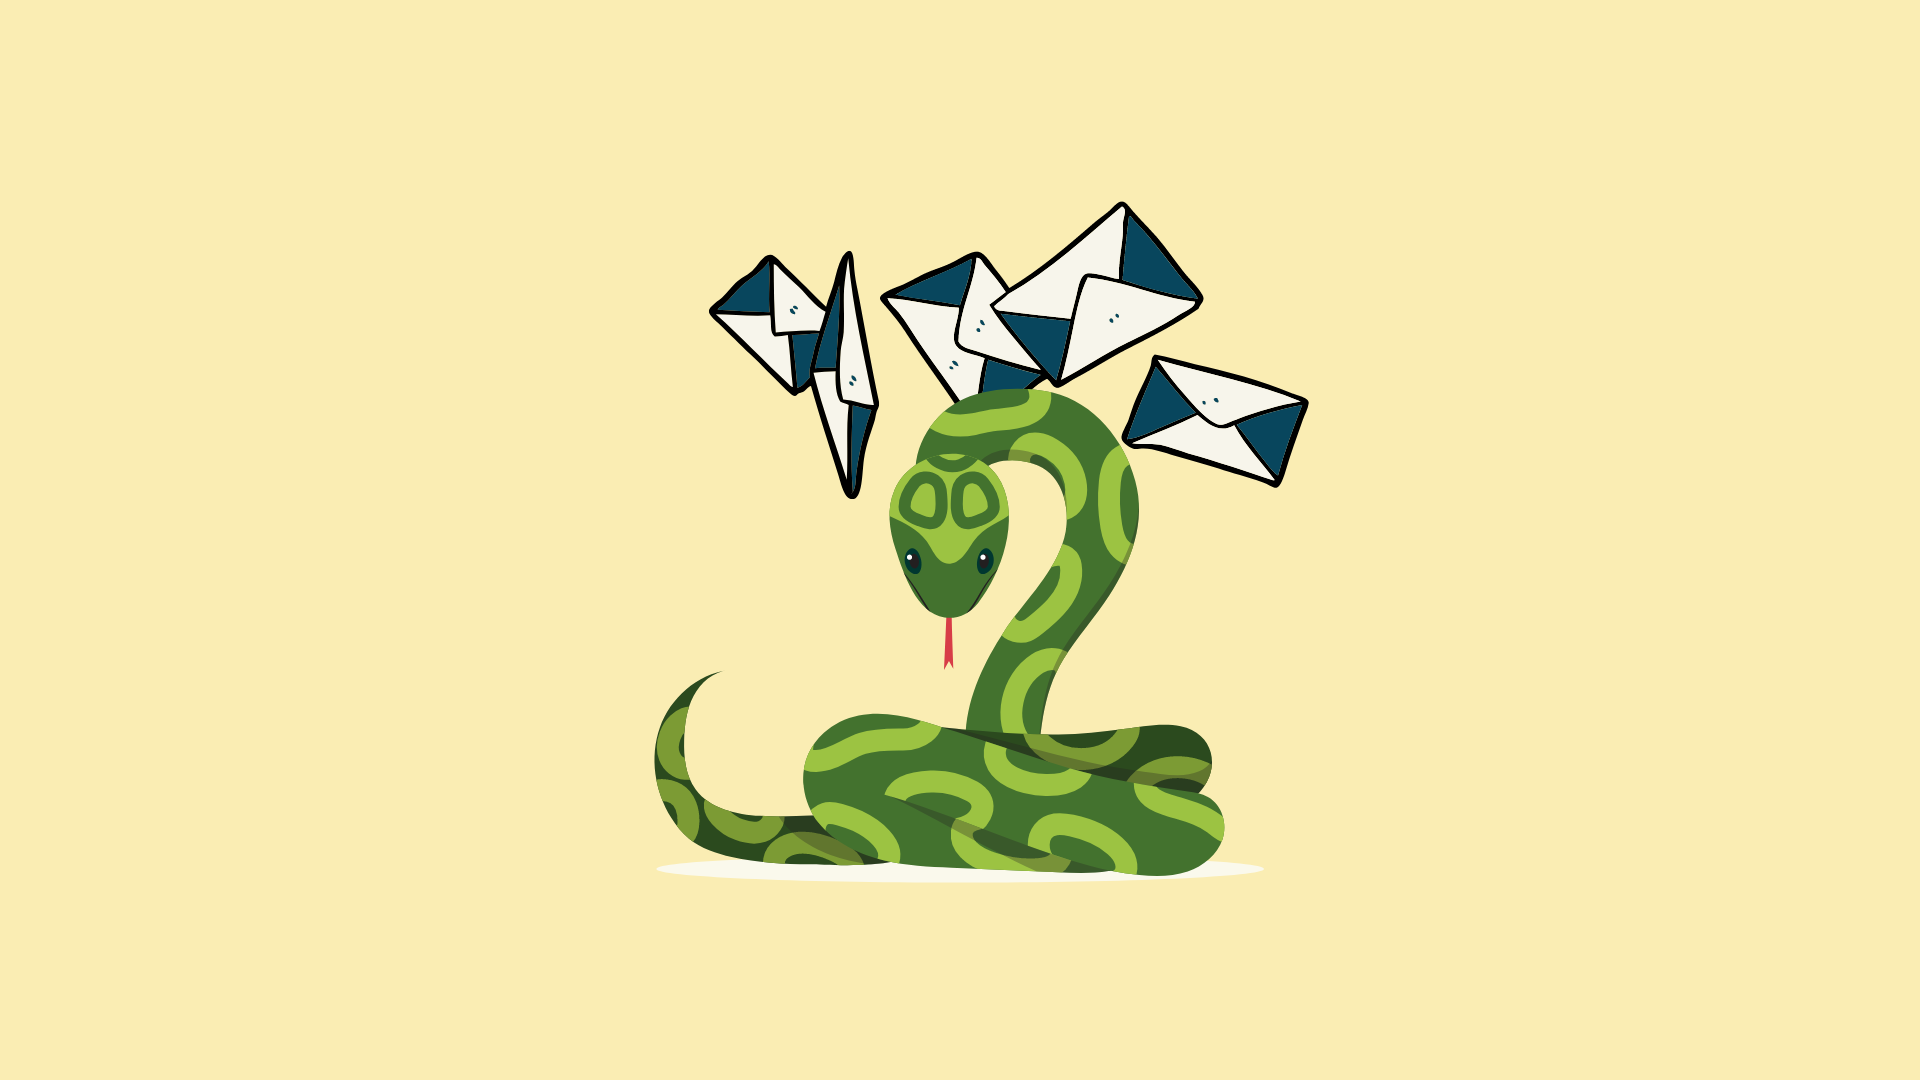 This graphic shows a python snake. It is intended to illustrate the article "Semplates Blog Header - Harness Power AWS SES Python". 